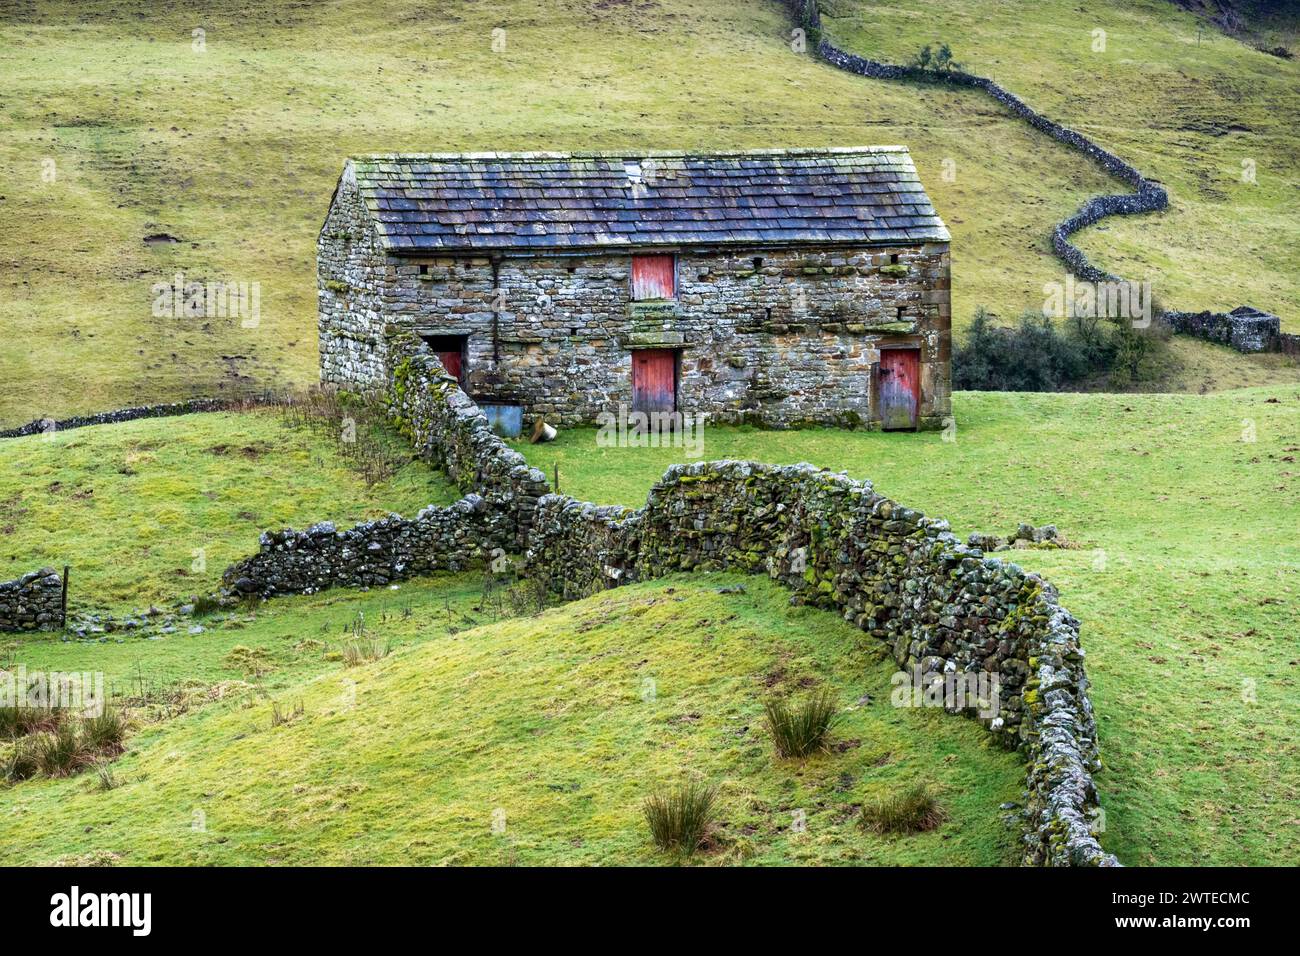 Stone barn and dry stone walls in Swaledale, Yorkshire Dales National Park.  The Coast to Coast long distance footpath passes through Swaledale. Stock Photo